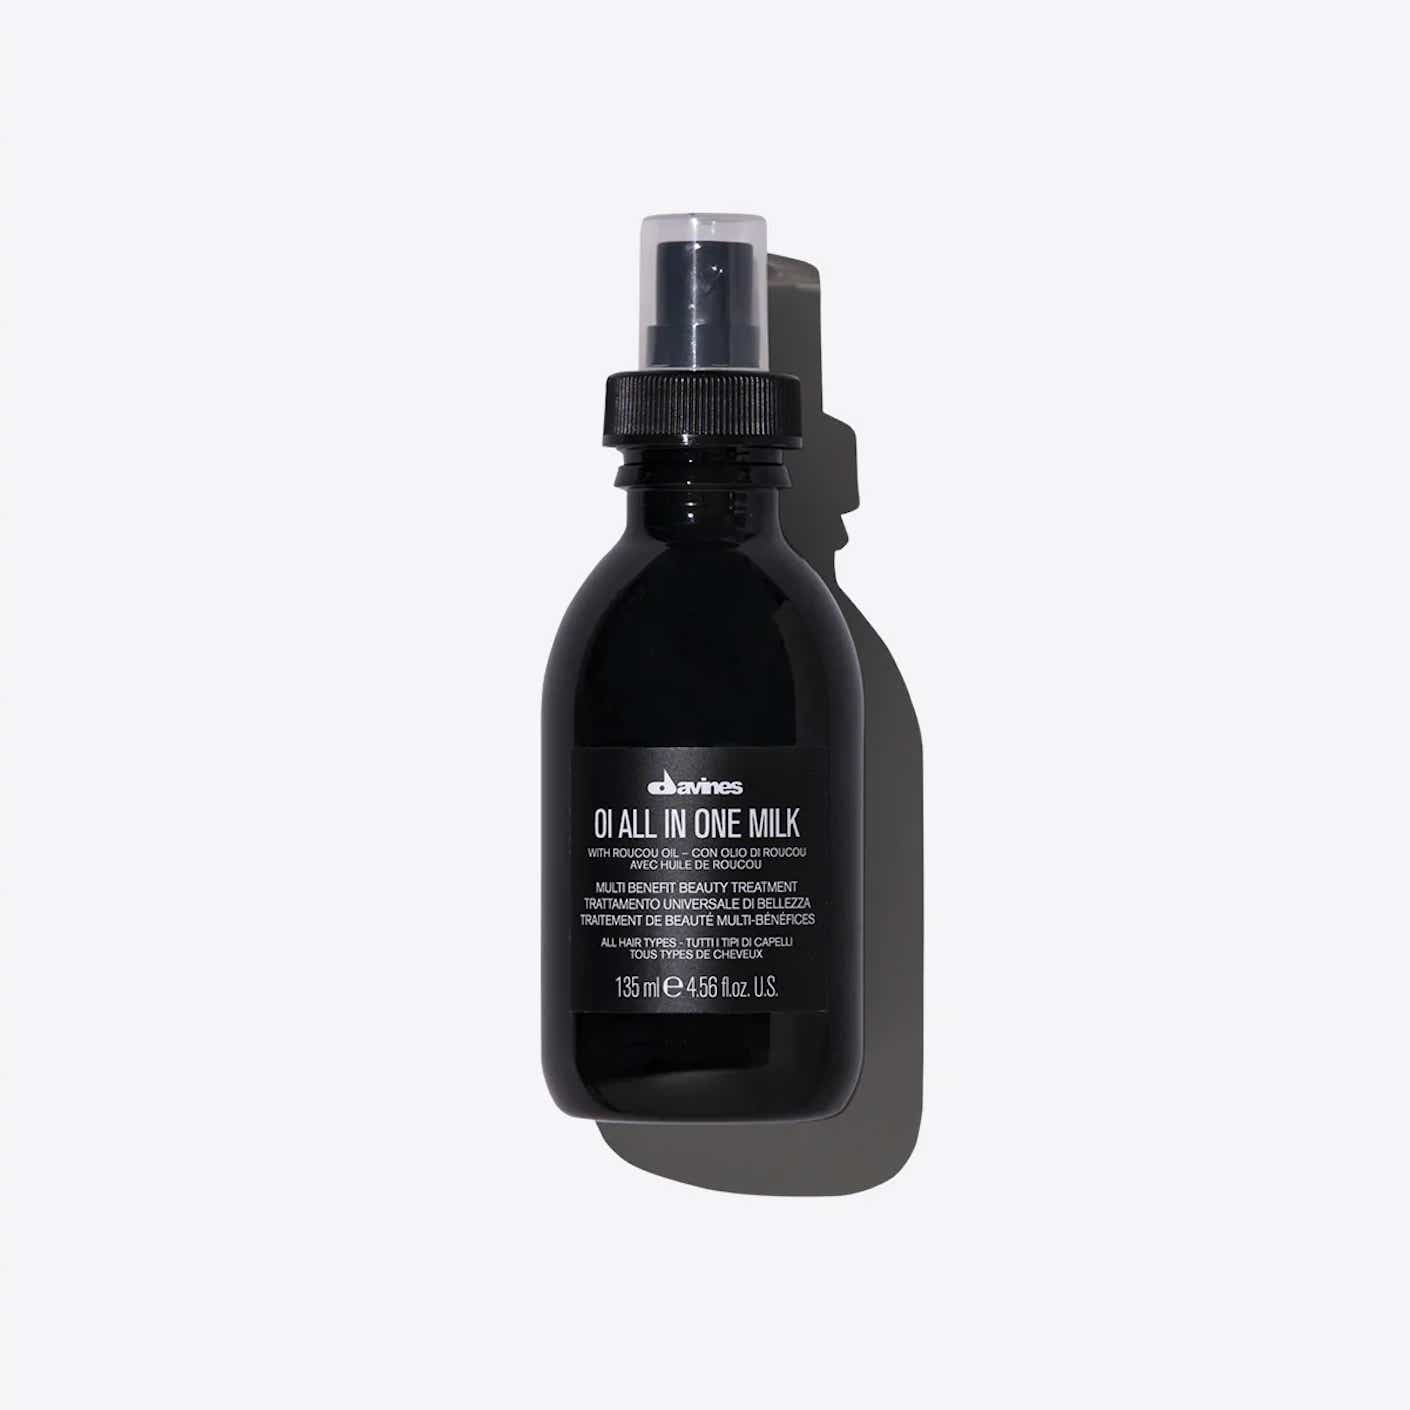 A black plastic bottle of spray on hair milk is pictured.